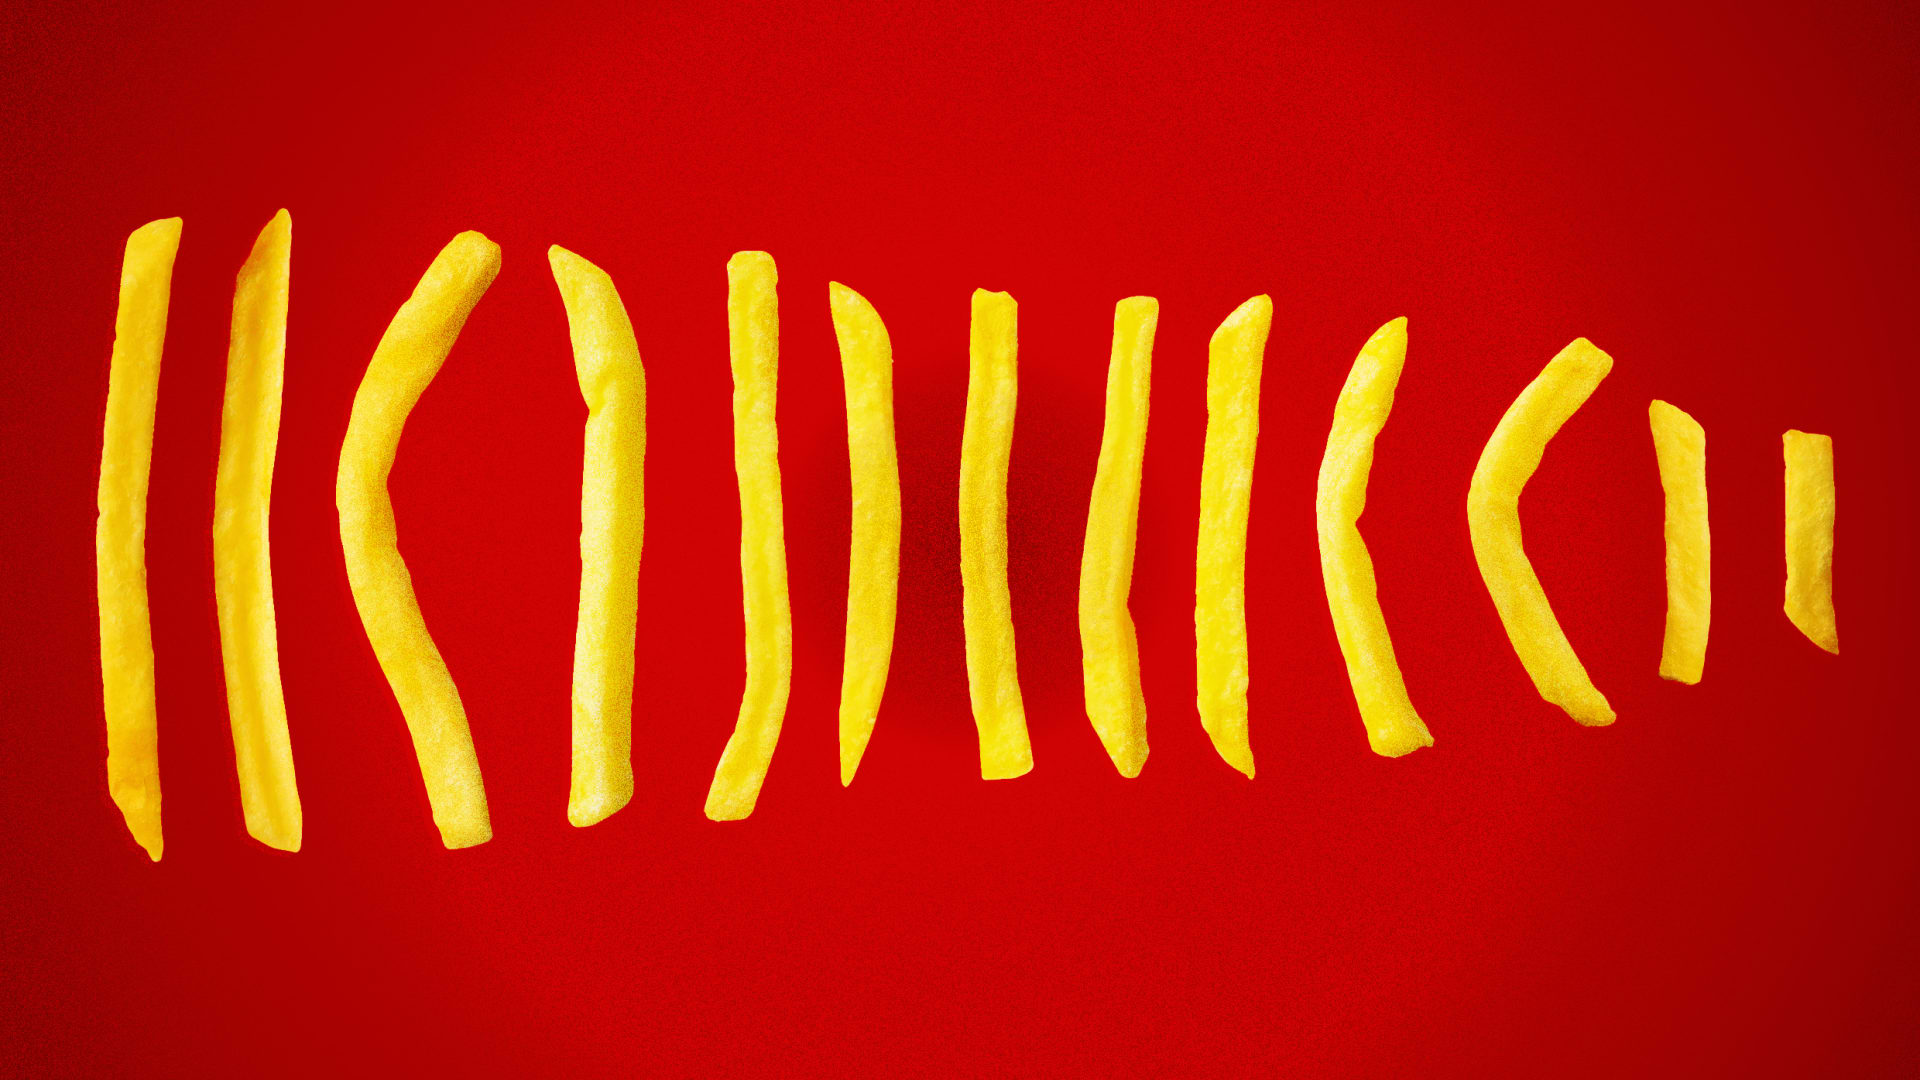 Wendy’s admits its fries were terrible